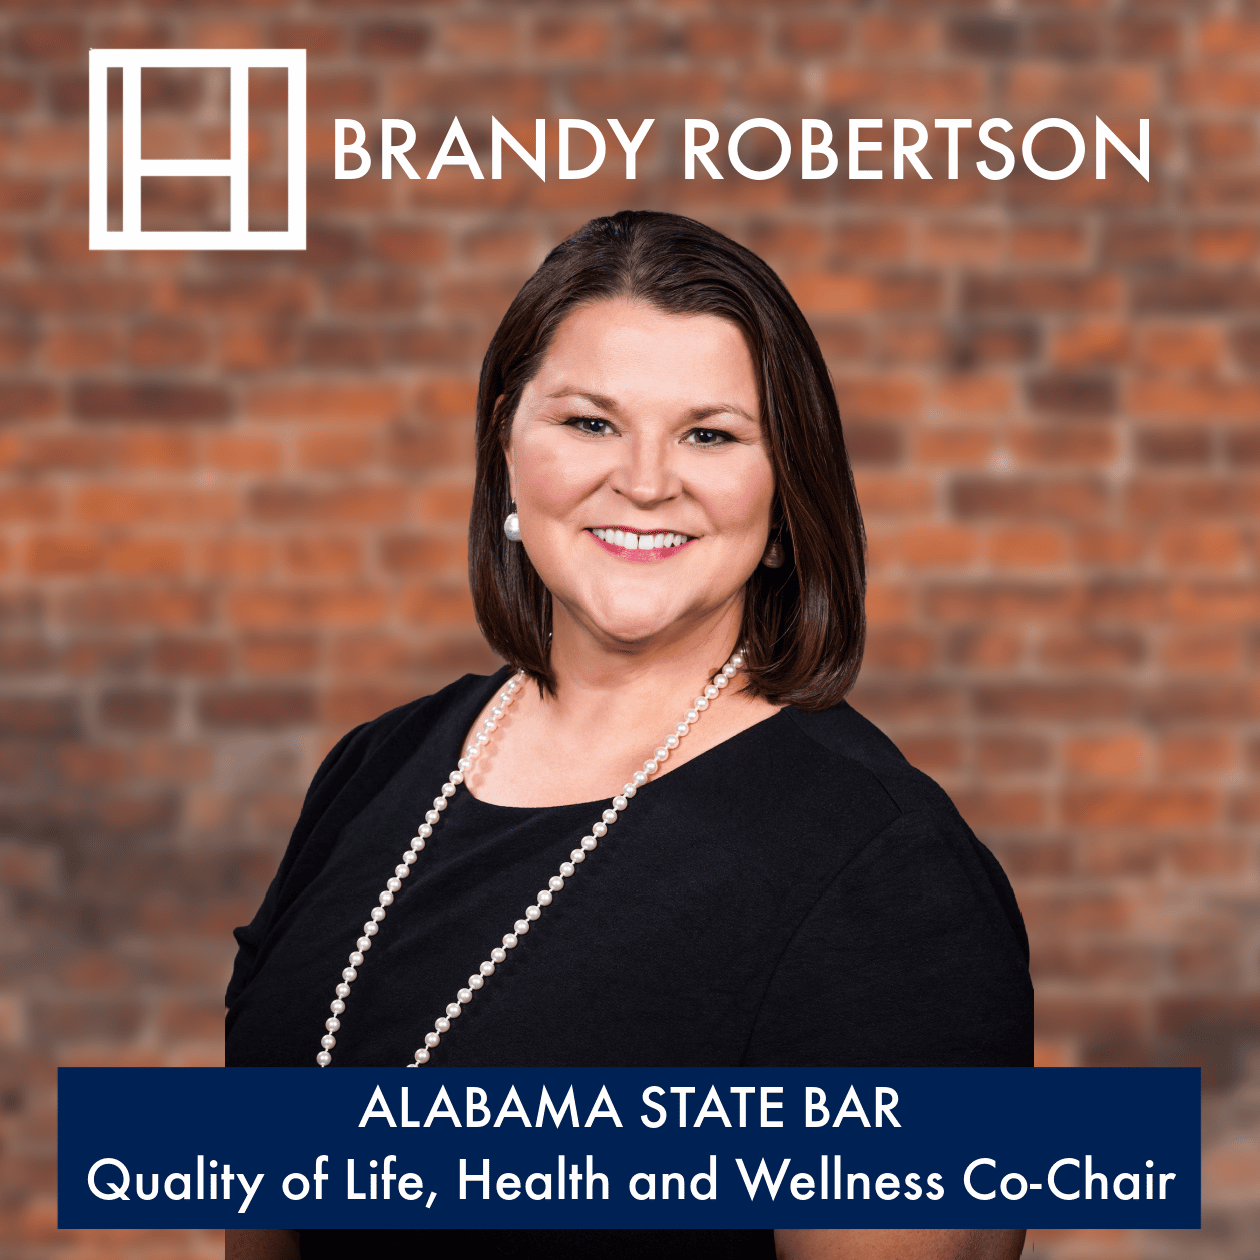 Brandy Robertson Appointed Co-Chair of Alabama State Bar Quality of Life Committee